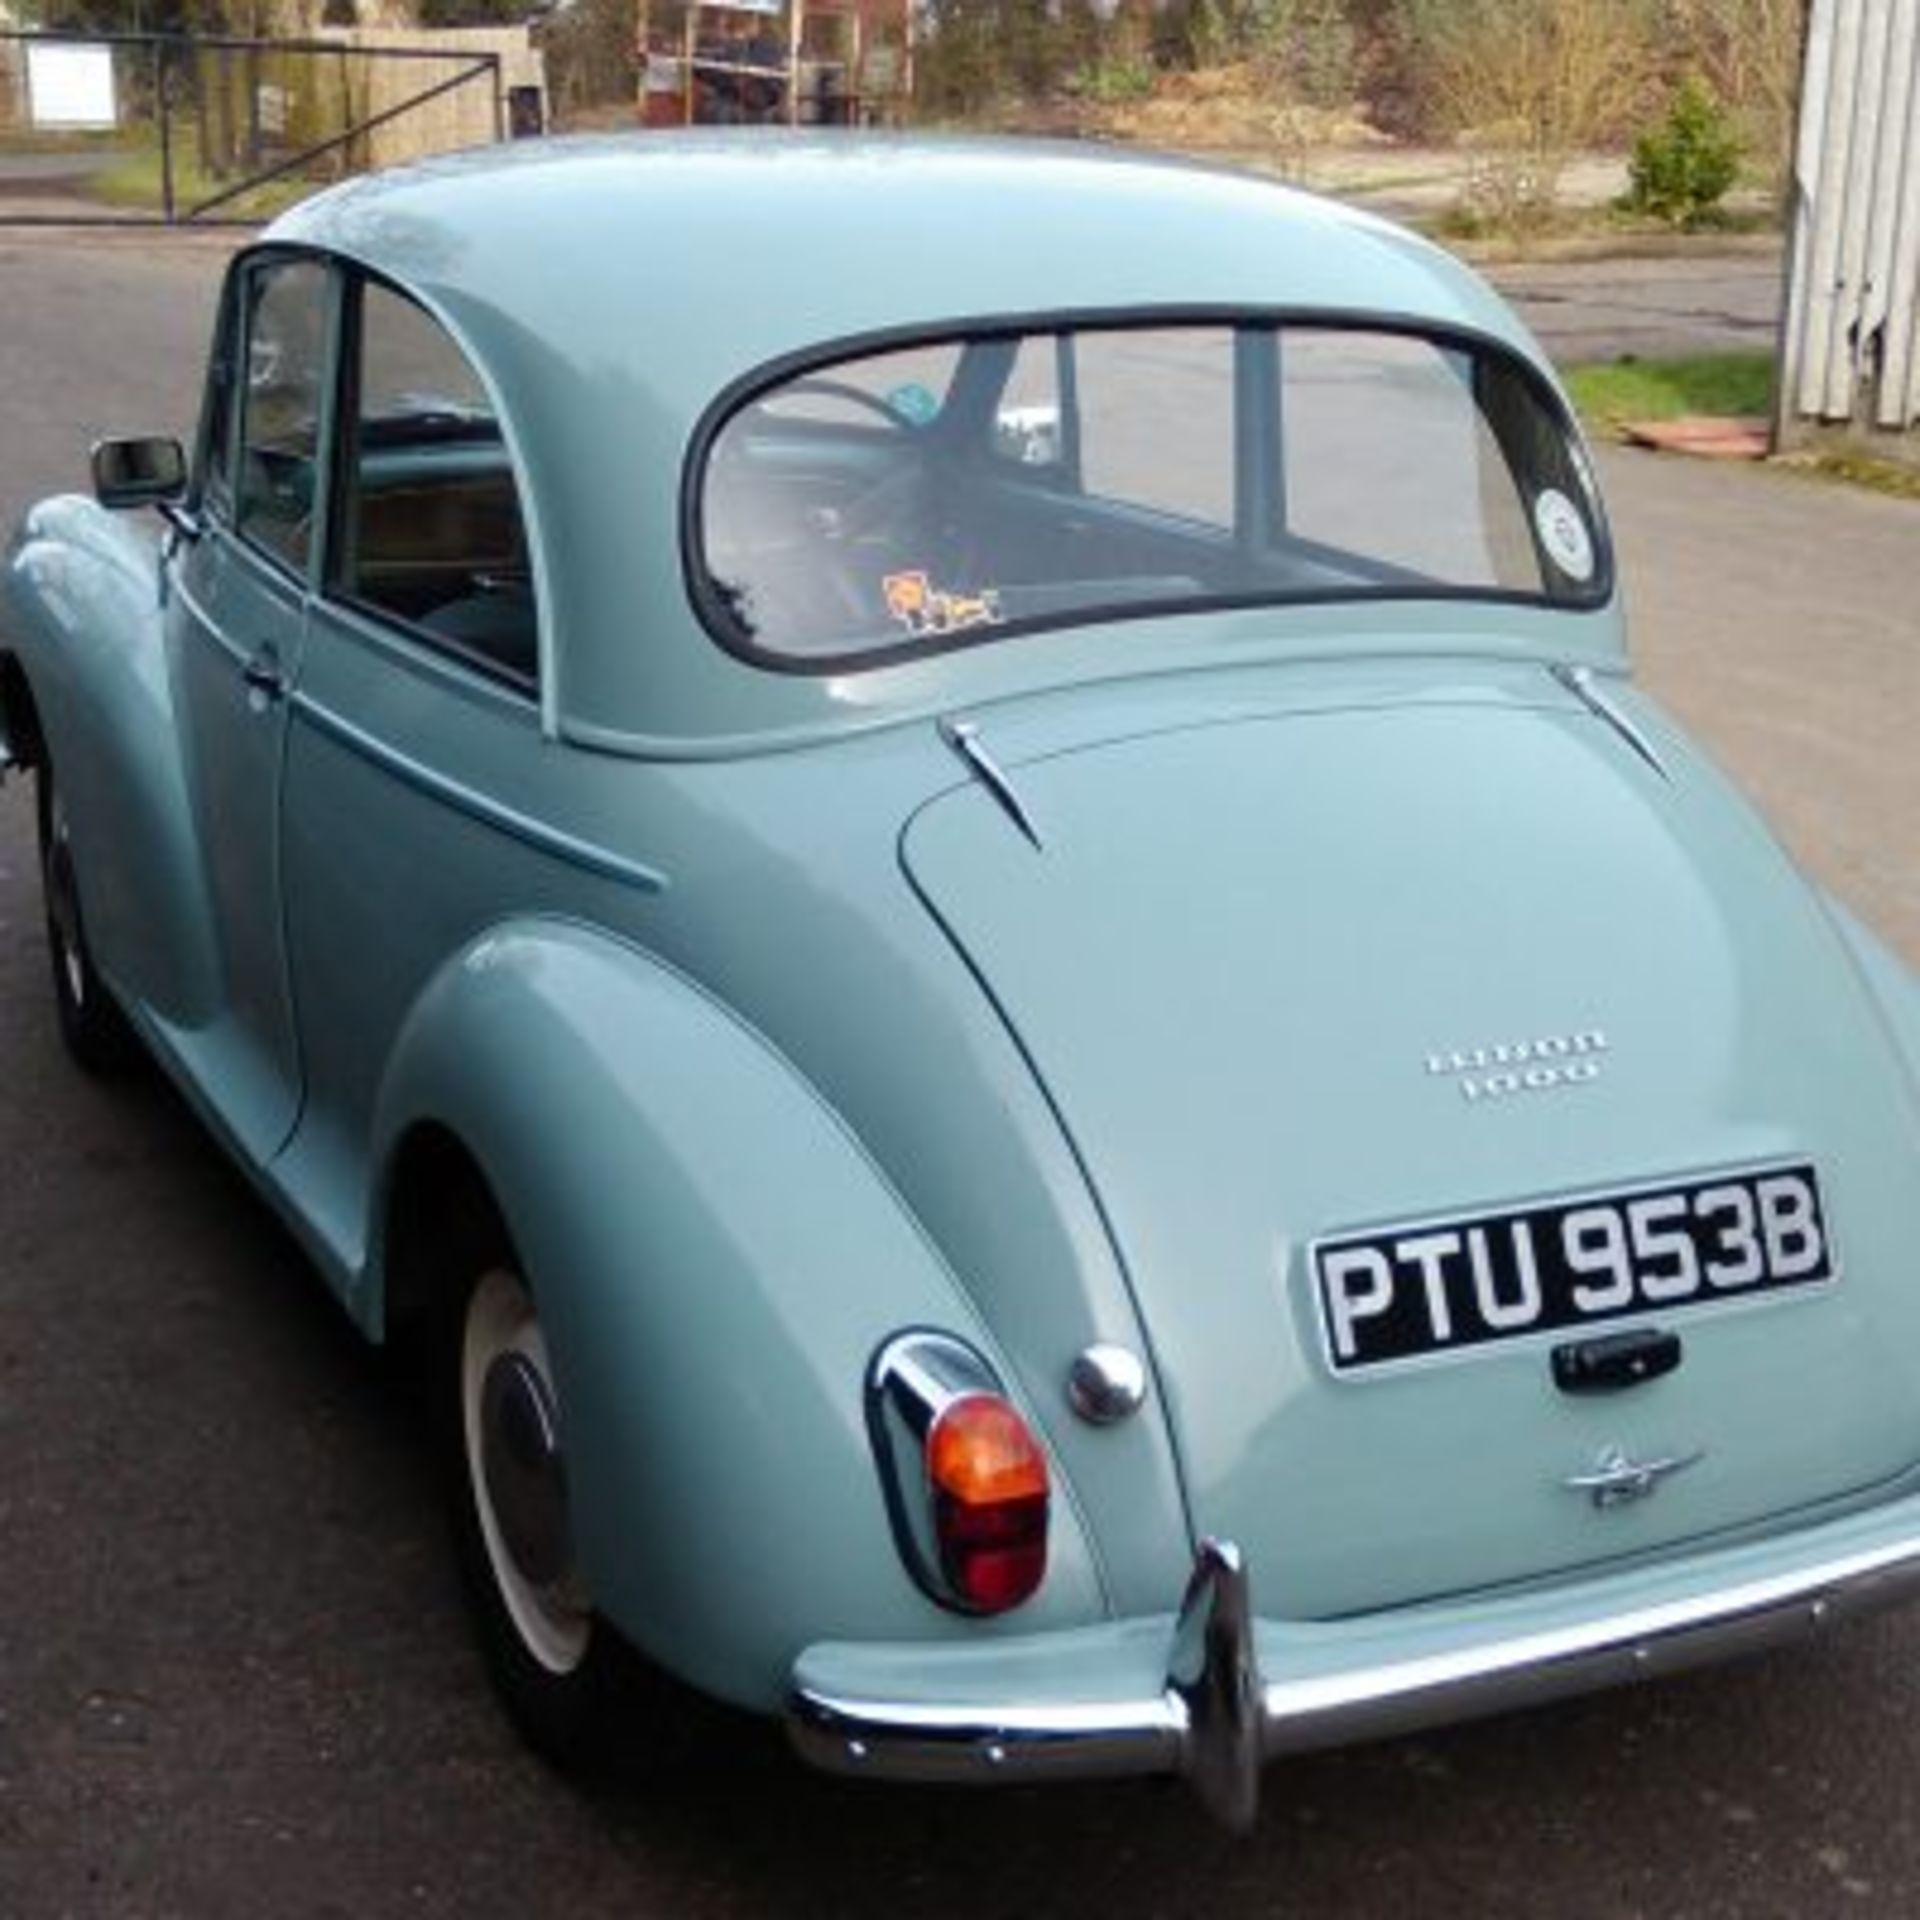 Morris Minor “Low mileage” 1964 - This lovely low mileage 1964 “Moggy Minor” has been owned by the - Image 3 of 14